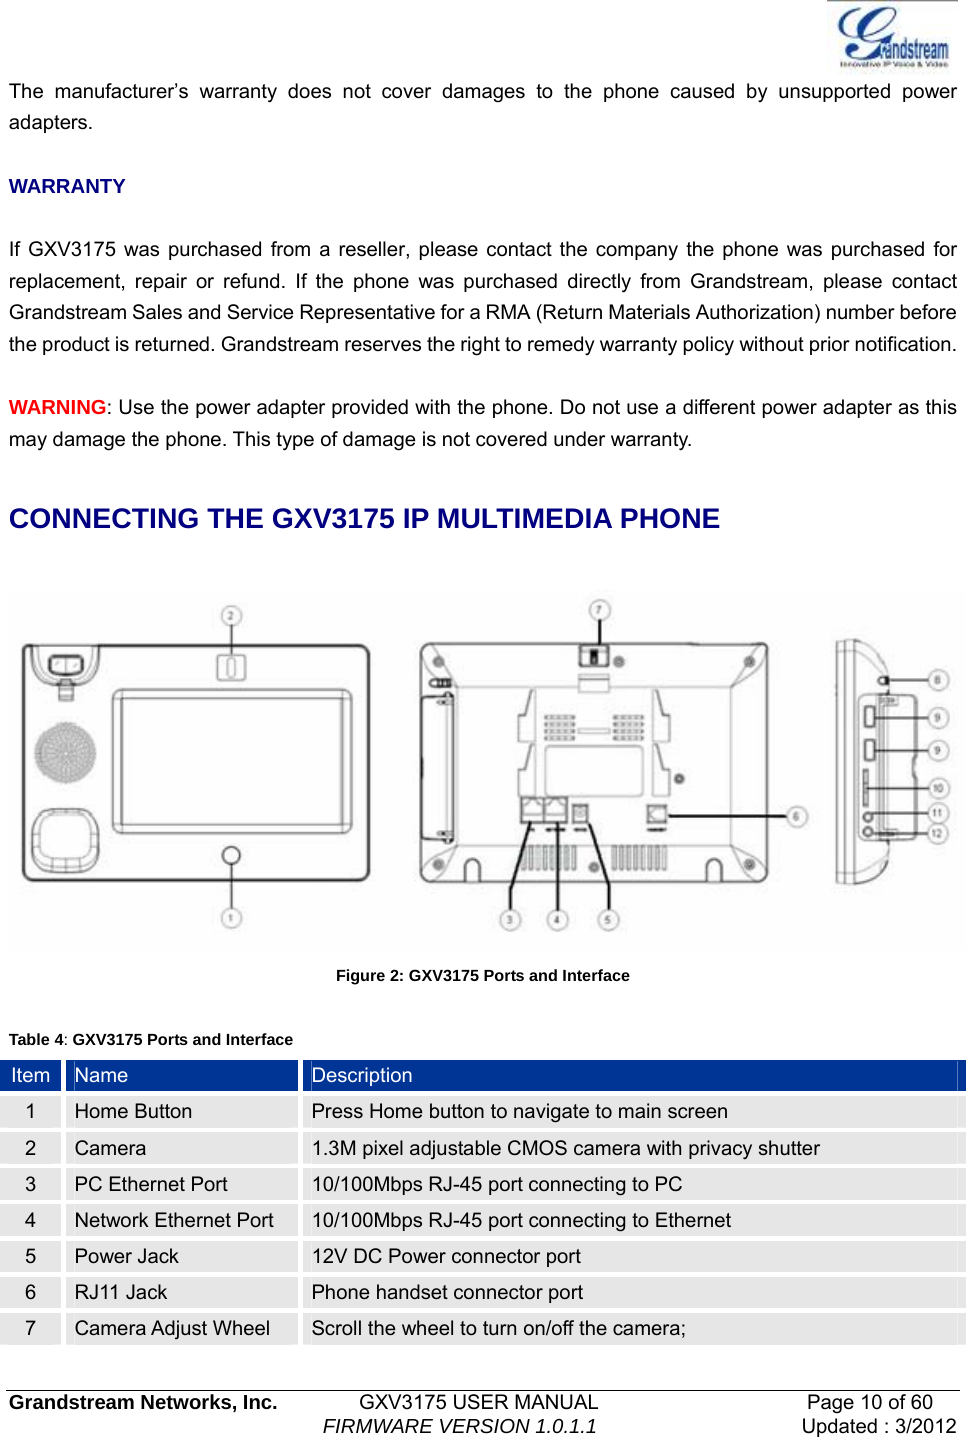   Grandstream Networks, Inc.        GXV3175 USER MANUAL                     Page 10 of 60                                FIRMWARE VERSION 1.0.1.1 Updated : 3/2012  The manufacturer’s warranty does not cover damages to the phone caused by unsupported power adapters.  WARRANTY  If GXV3175 was purchased from a reseller, please contact the company the phone was purchased for replacement, repair or refund. If the phone was purchased directly from Grandstream, please contact Grandstream Sales and Service Representative for a RMA (Return Materials Authorization) number before the product is returned. Grandstream reserves the right to remedy warranty policy without prior notification.  WARNING: Use the power adapter provided with the phone. Do not use a different power adapter as this may damage the phone. This type of damage is not covered under warranty.  CONNECTING THE GXV3175 IP MULTIMEDIA PHONE   Figure 2: GXV3175 Ports and Interface  Table 4: GXV3175 Ports and Interface Item  Name  Description 1  Home Button  Press Home button to navigate to main screen 2  Camera  1.3M pixel adjustable CMOS camera with privacy shutter 3  PC Ethernet Port  10/100Mbps RJ-45 port connecting to PC 4  Network Ethernet Port  10/100Mbps RJ-45 port connecting to Ethernet 5  Power Jack  12V DC Power connector port 6  RJ11 Jack  Phone handset connector port 7  Camera Adjust Wheel  Scroll the wheel to turn on/off the camera; 